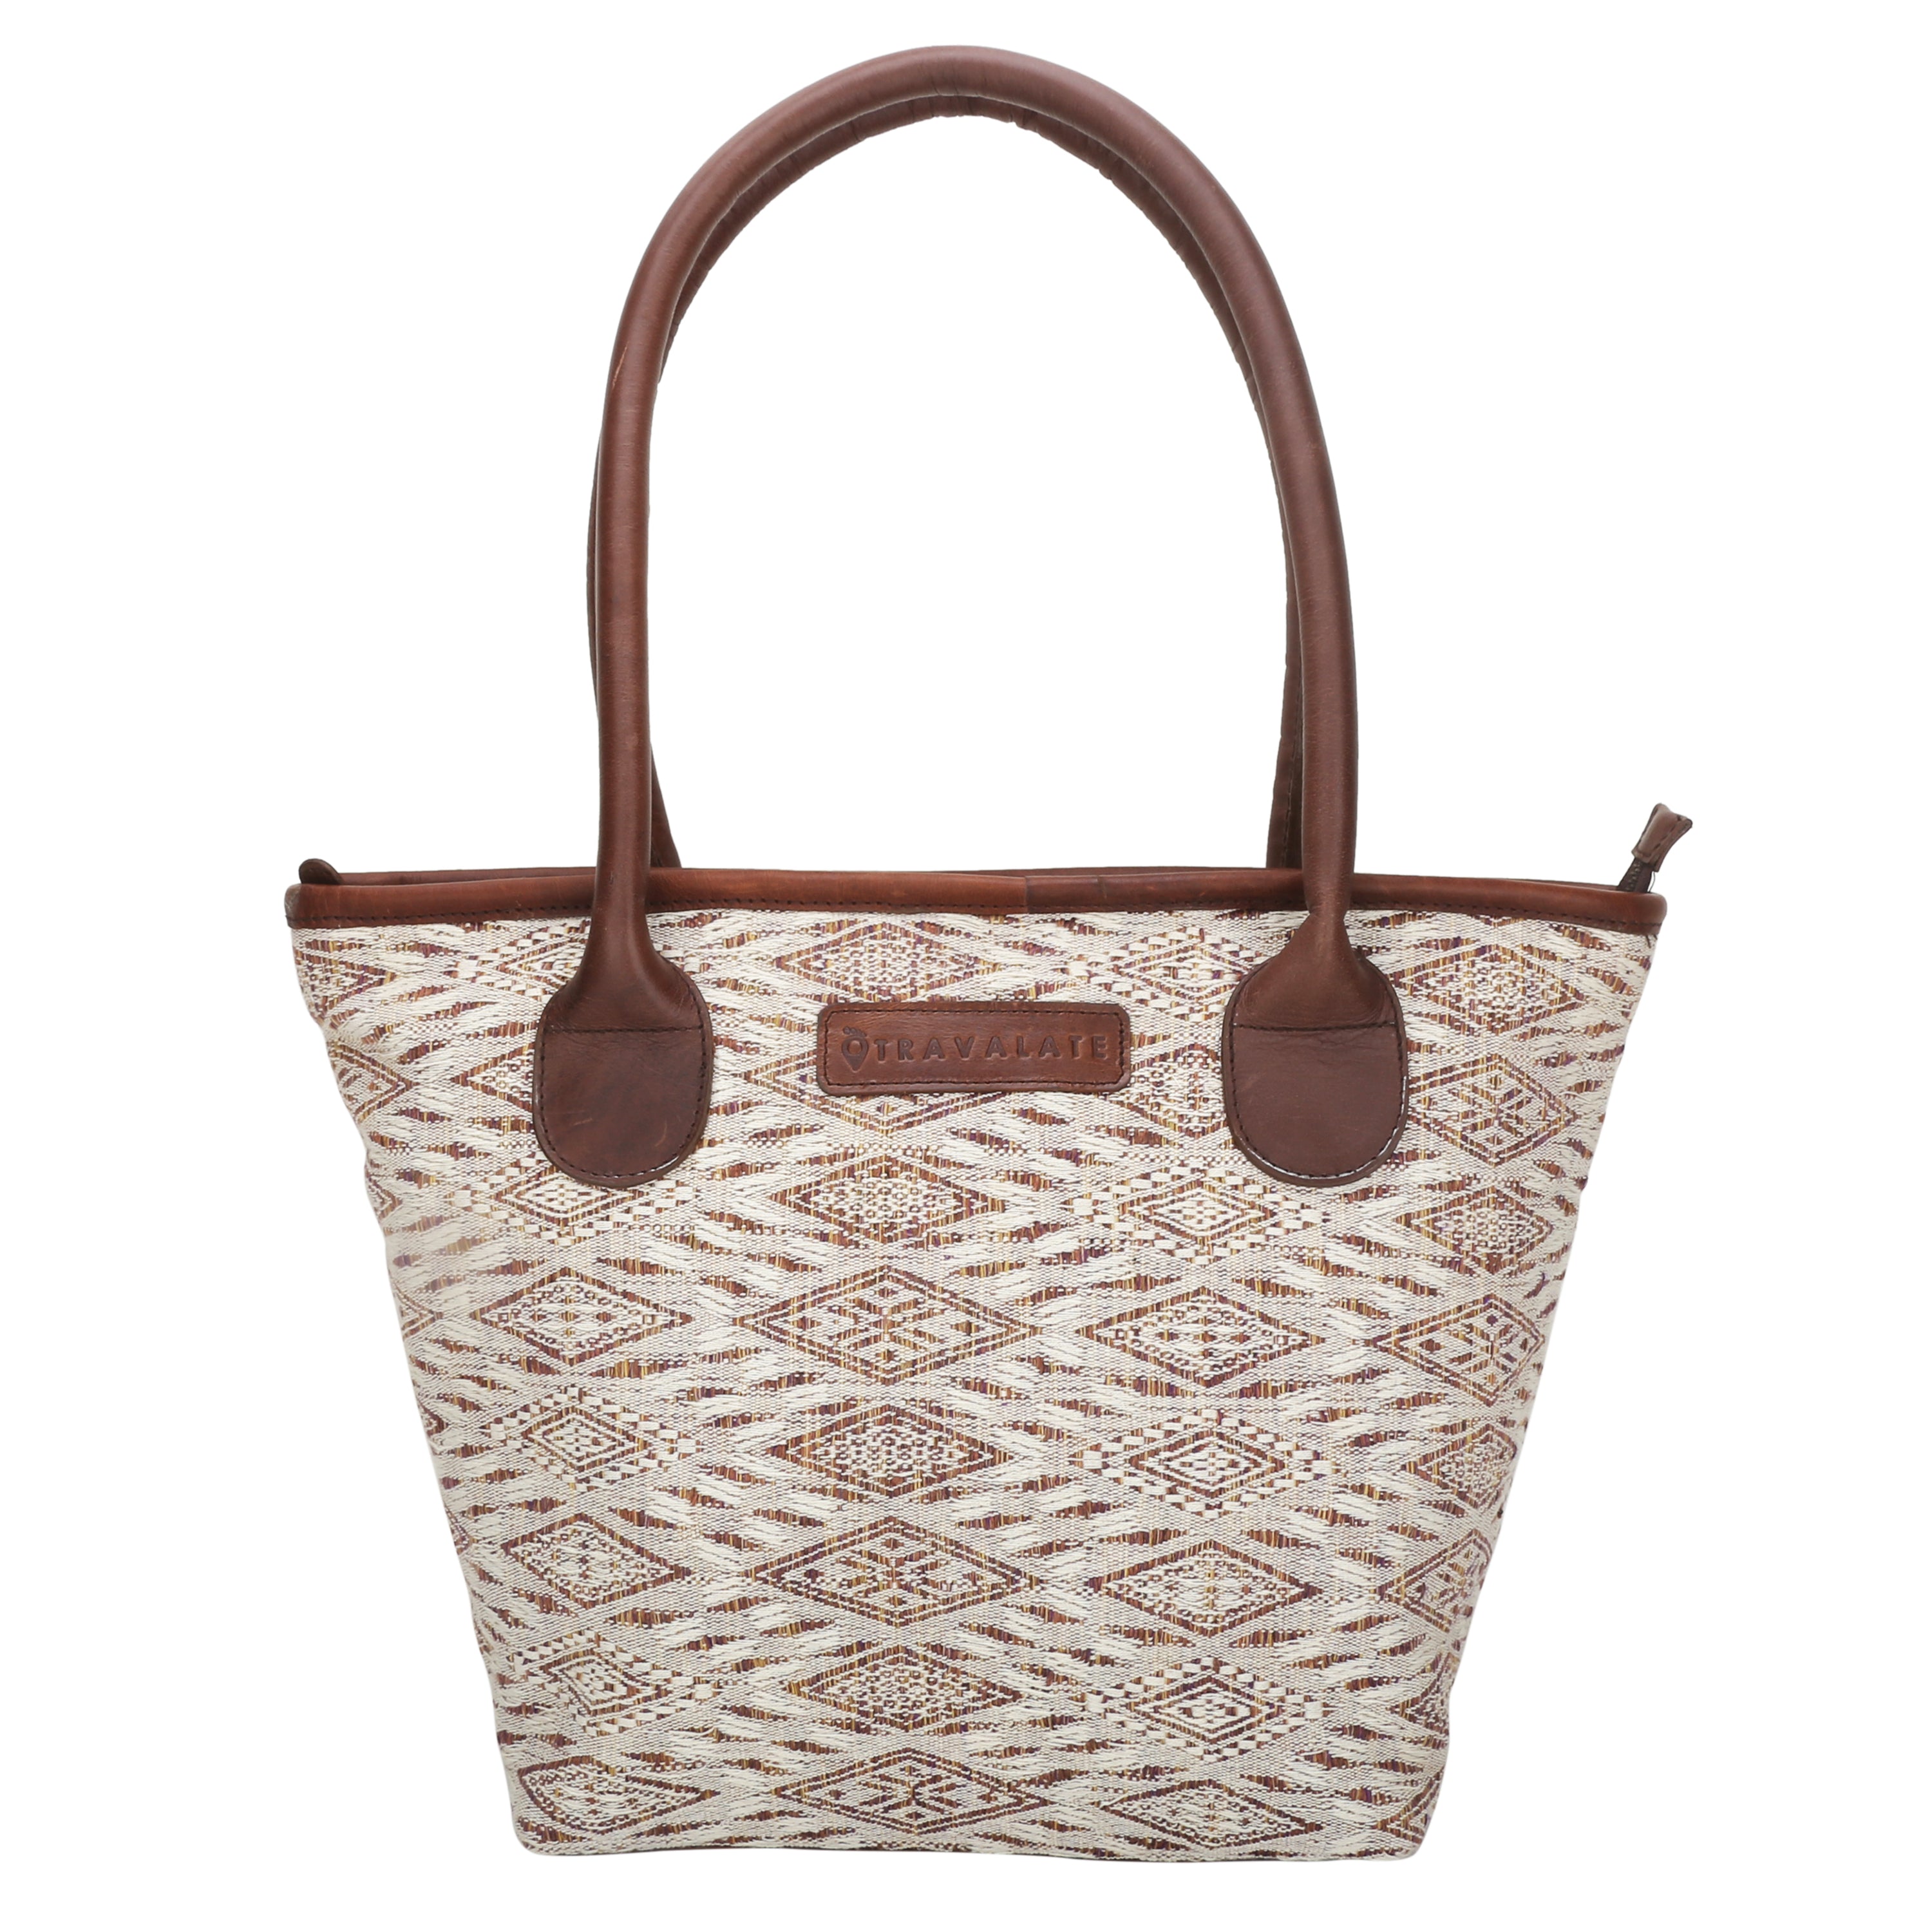 Woven Patterned Tote Bag | Brown and Beige